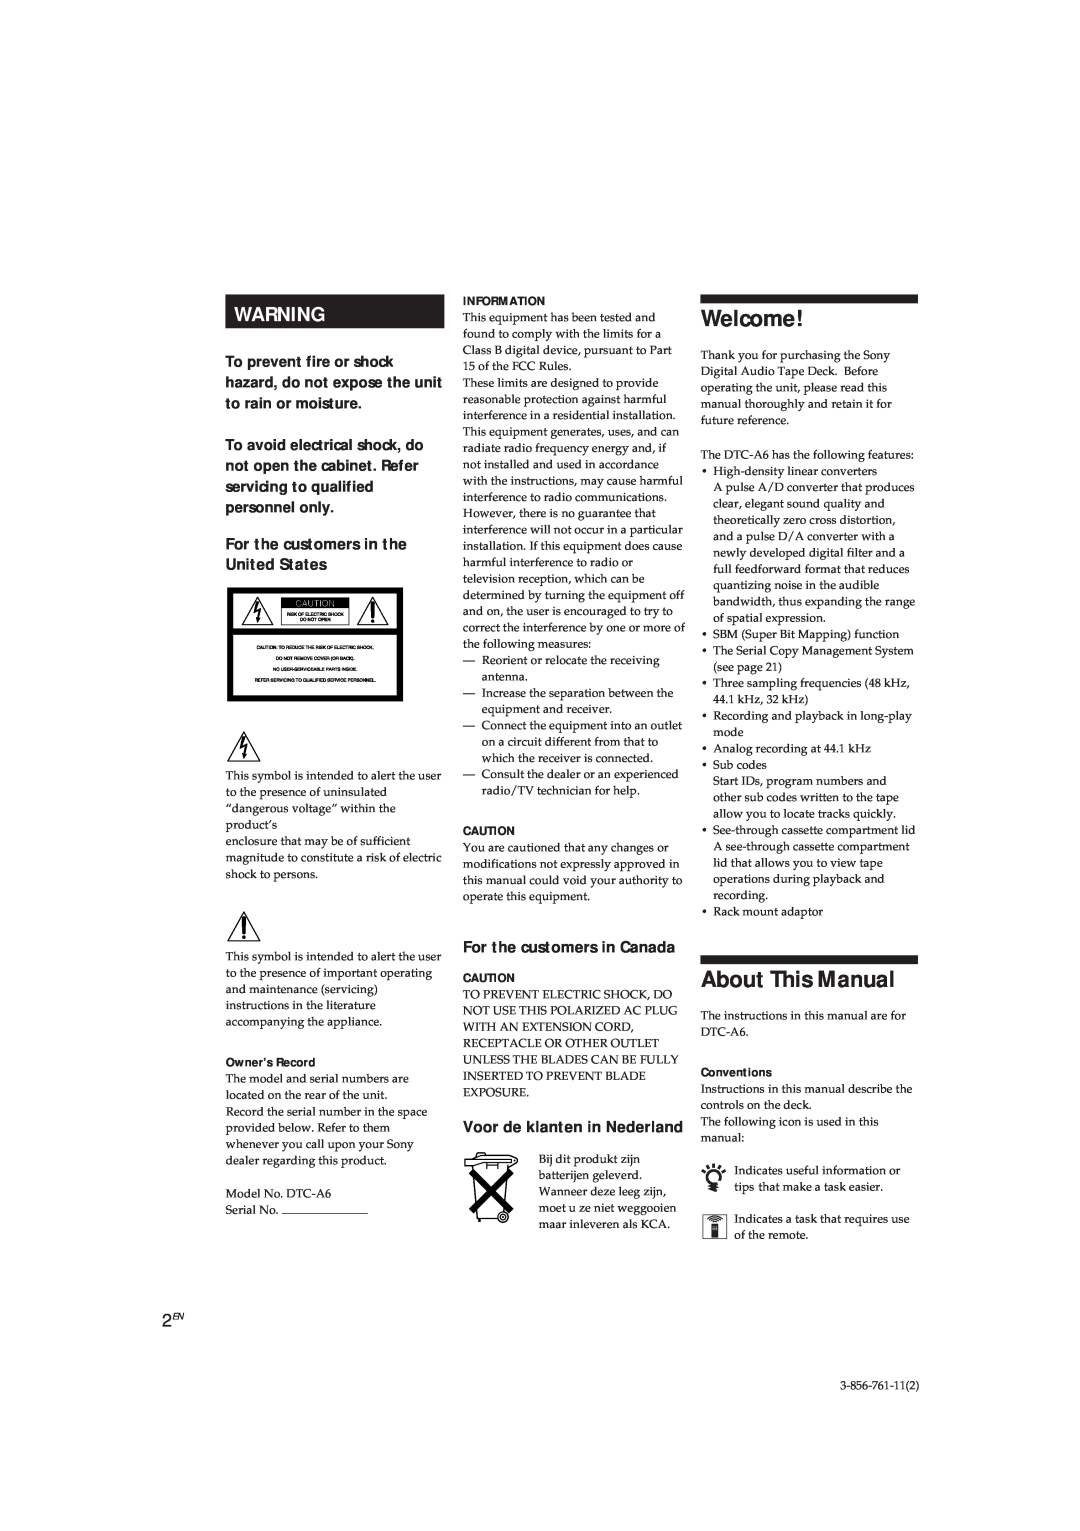 Sony DTC-A6 operating instructions Welcome, About This Manual, For the customers in the United States 